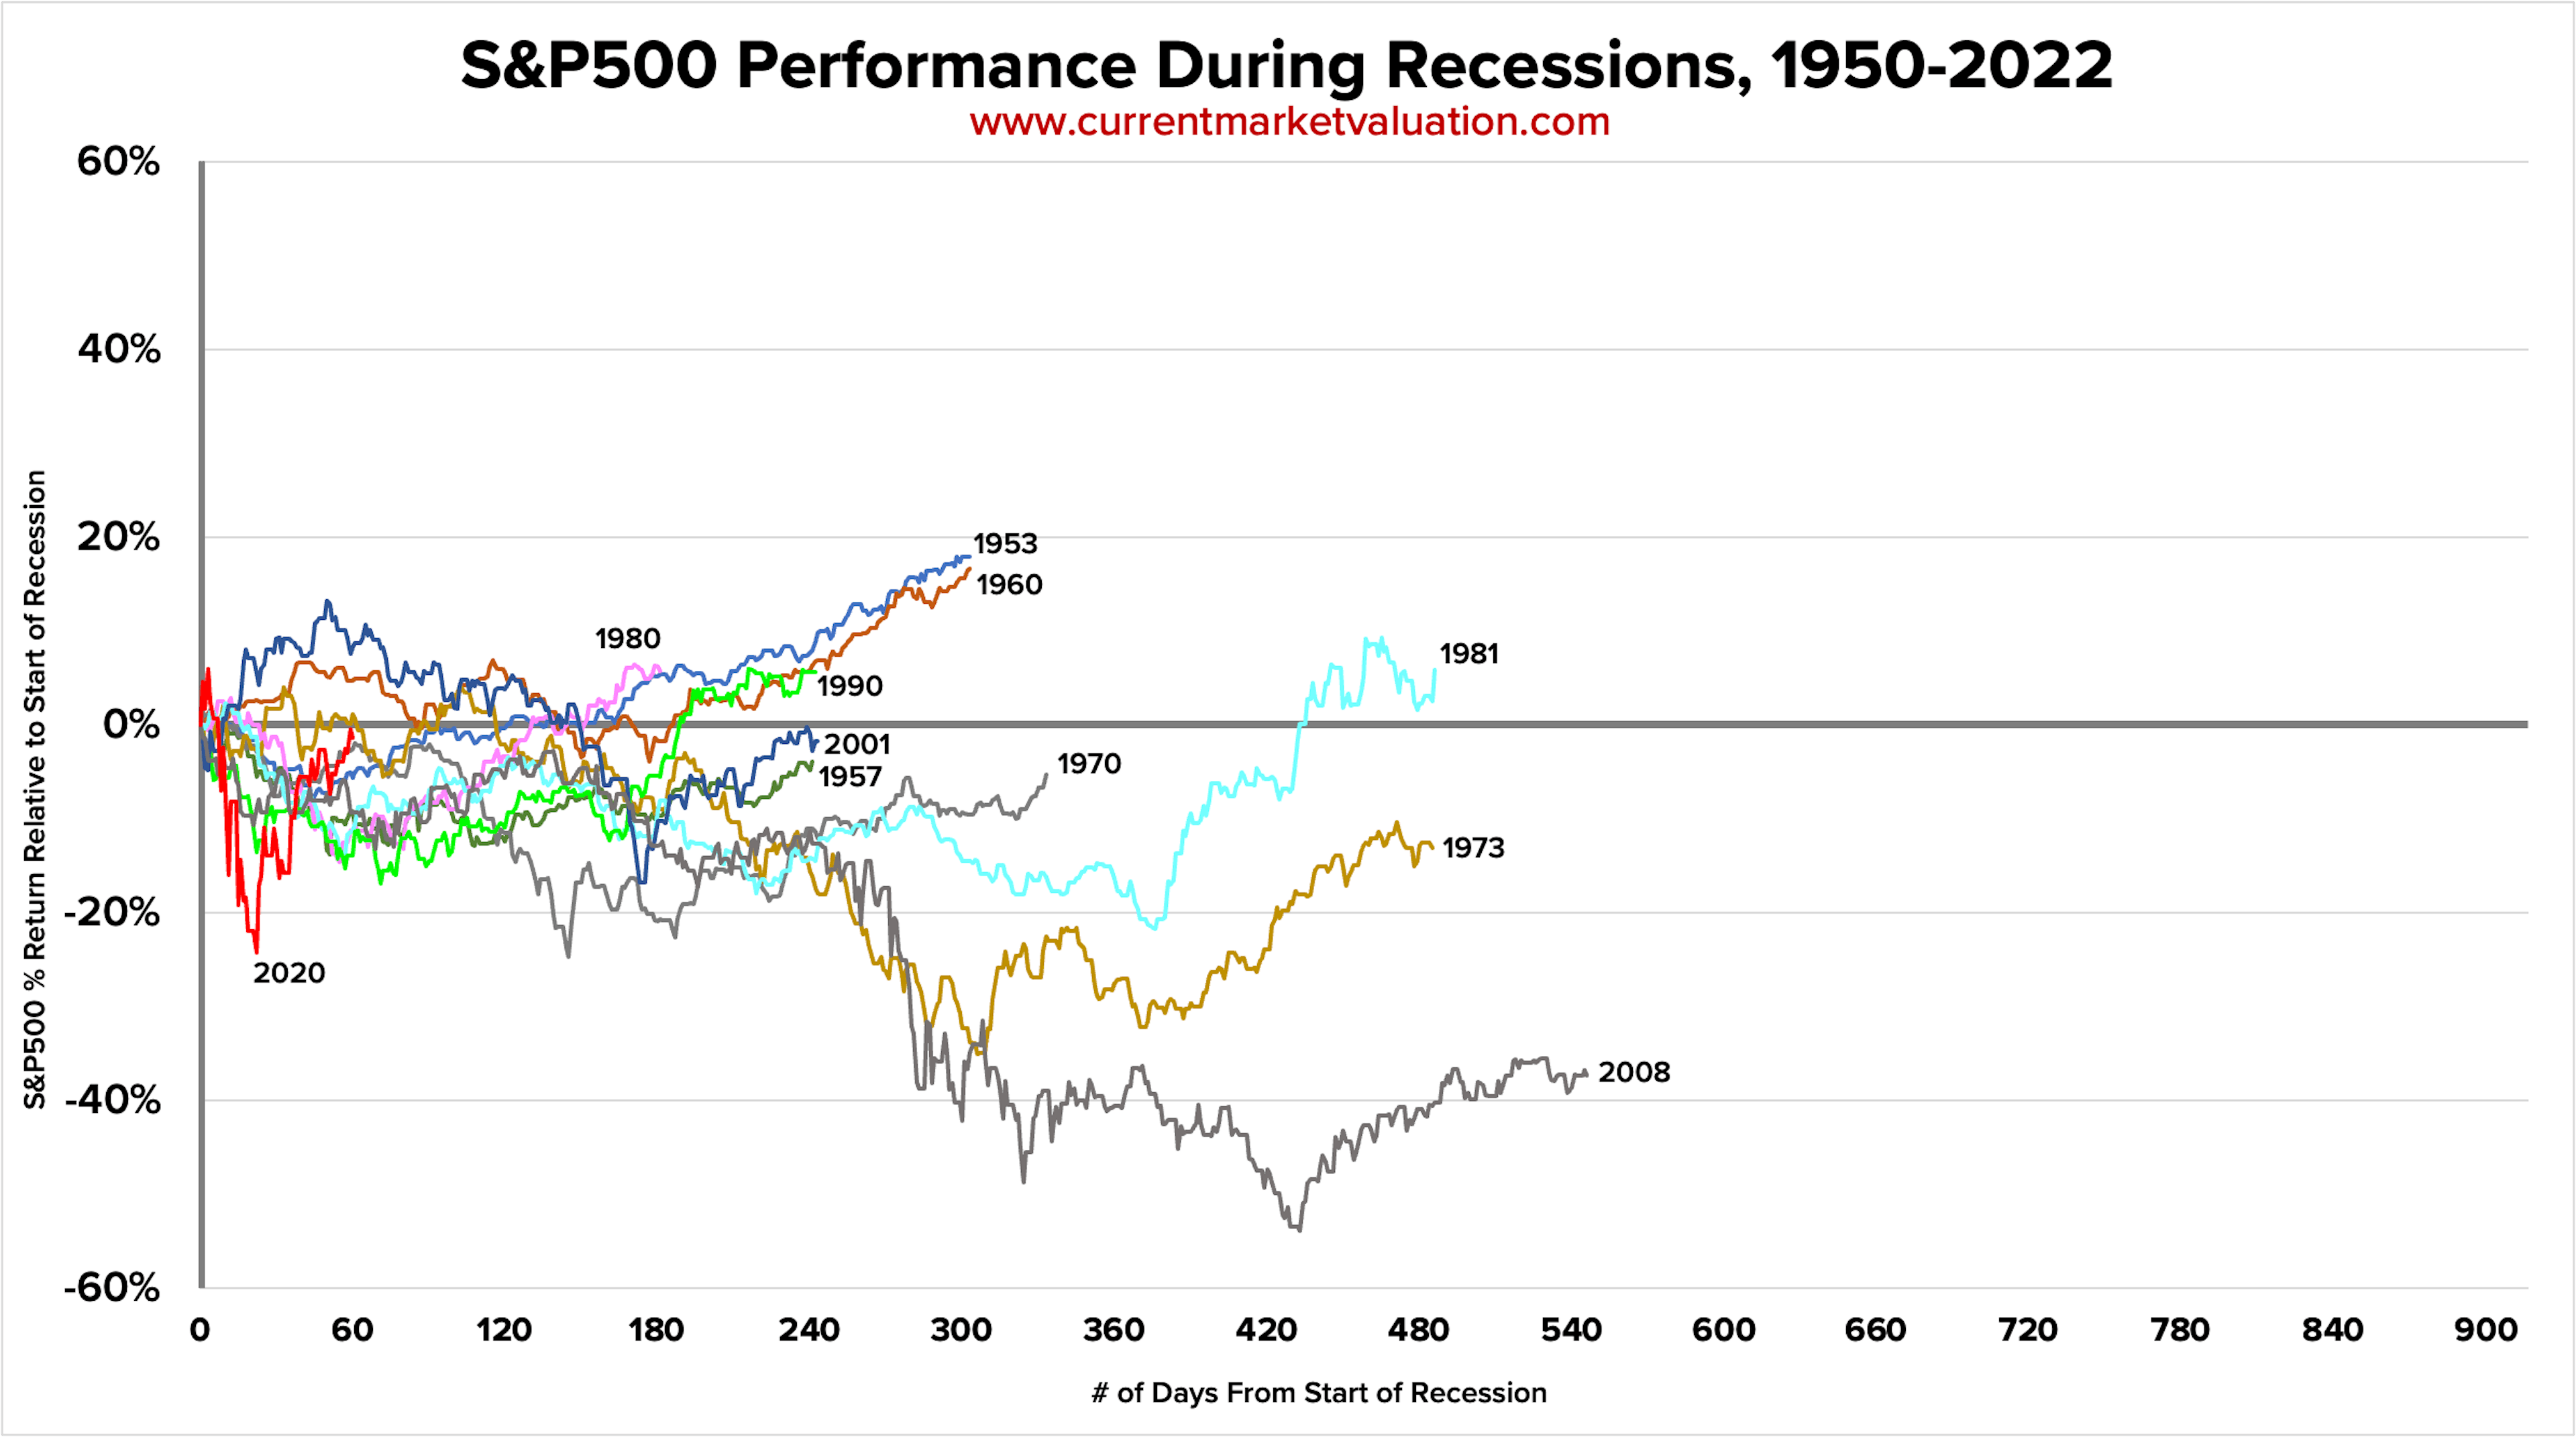 S&P500 performance during recessions